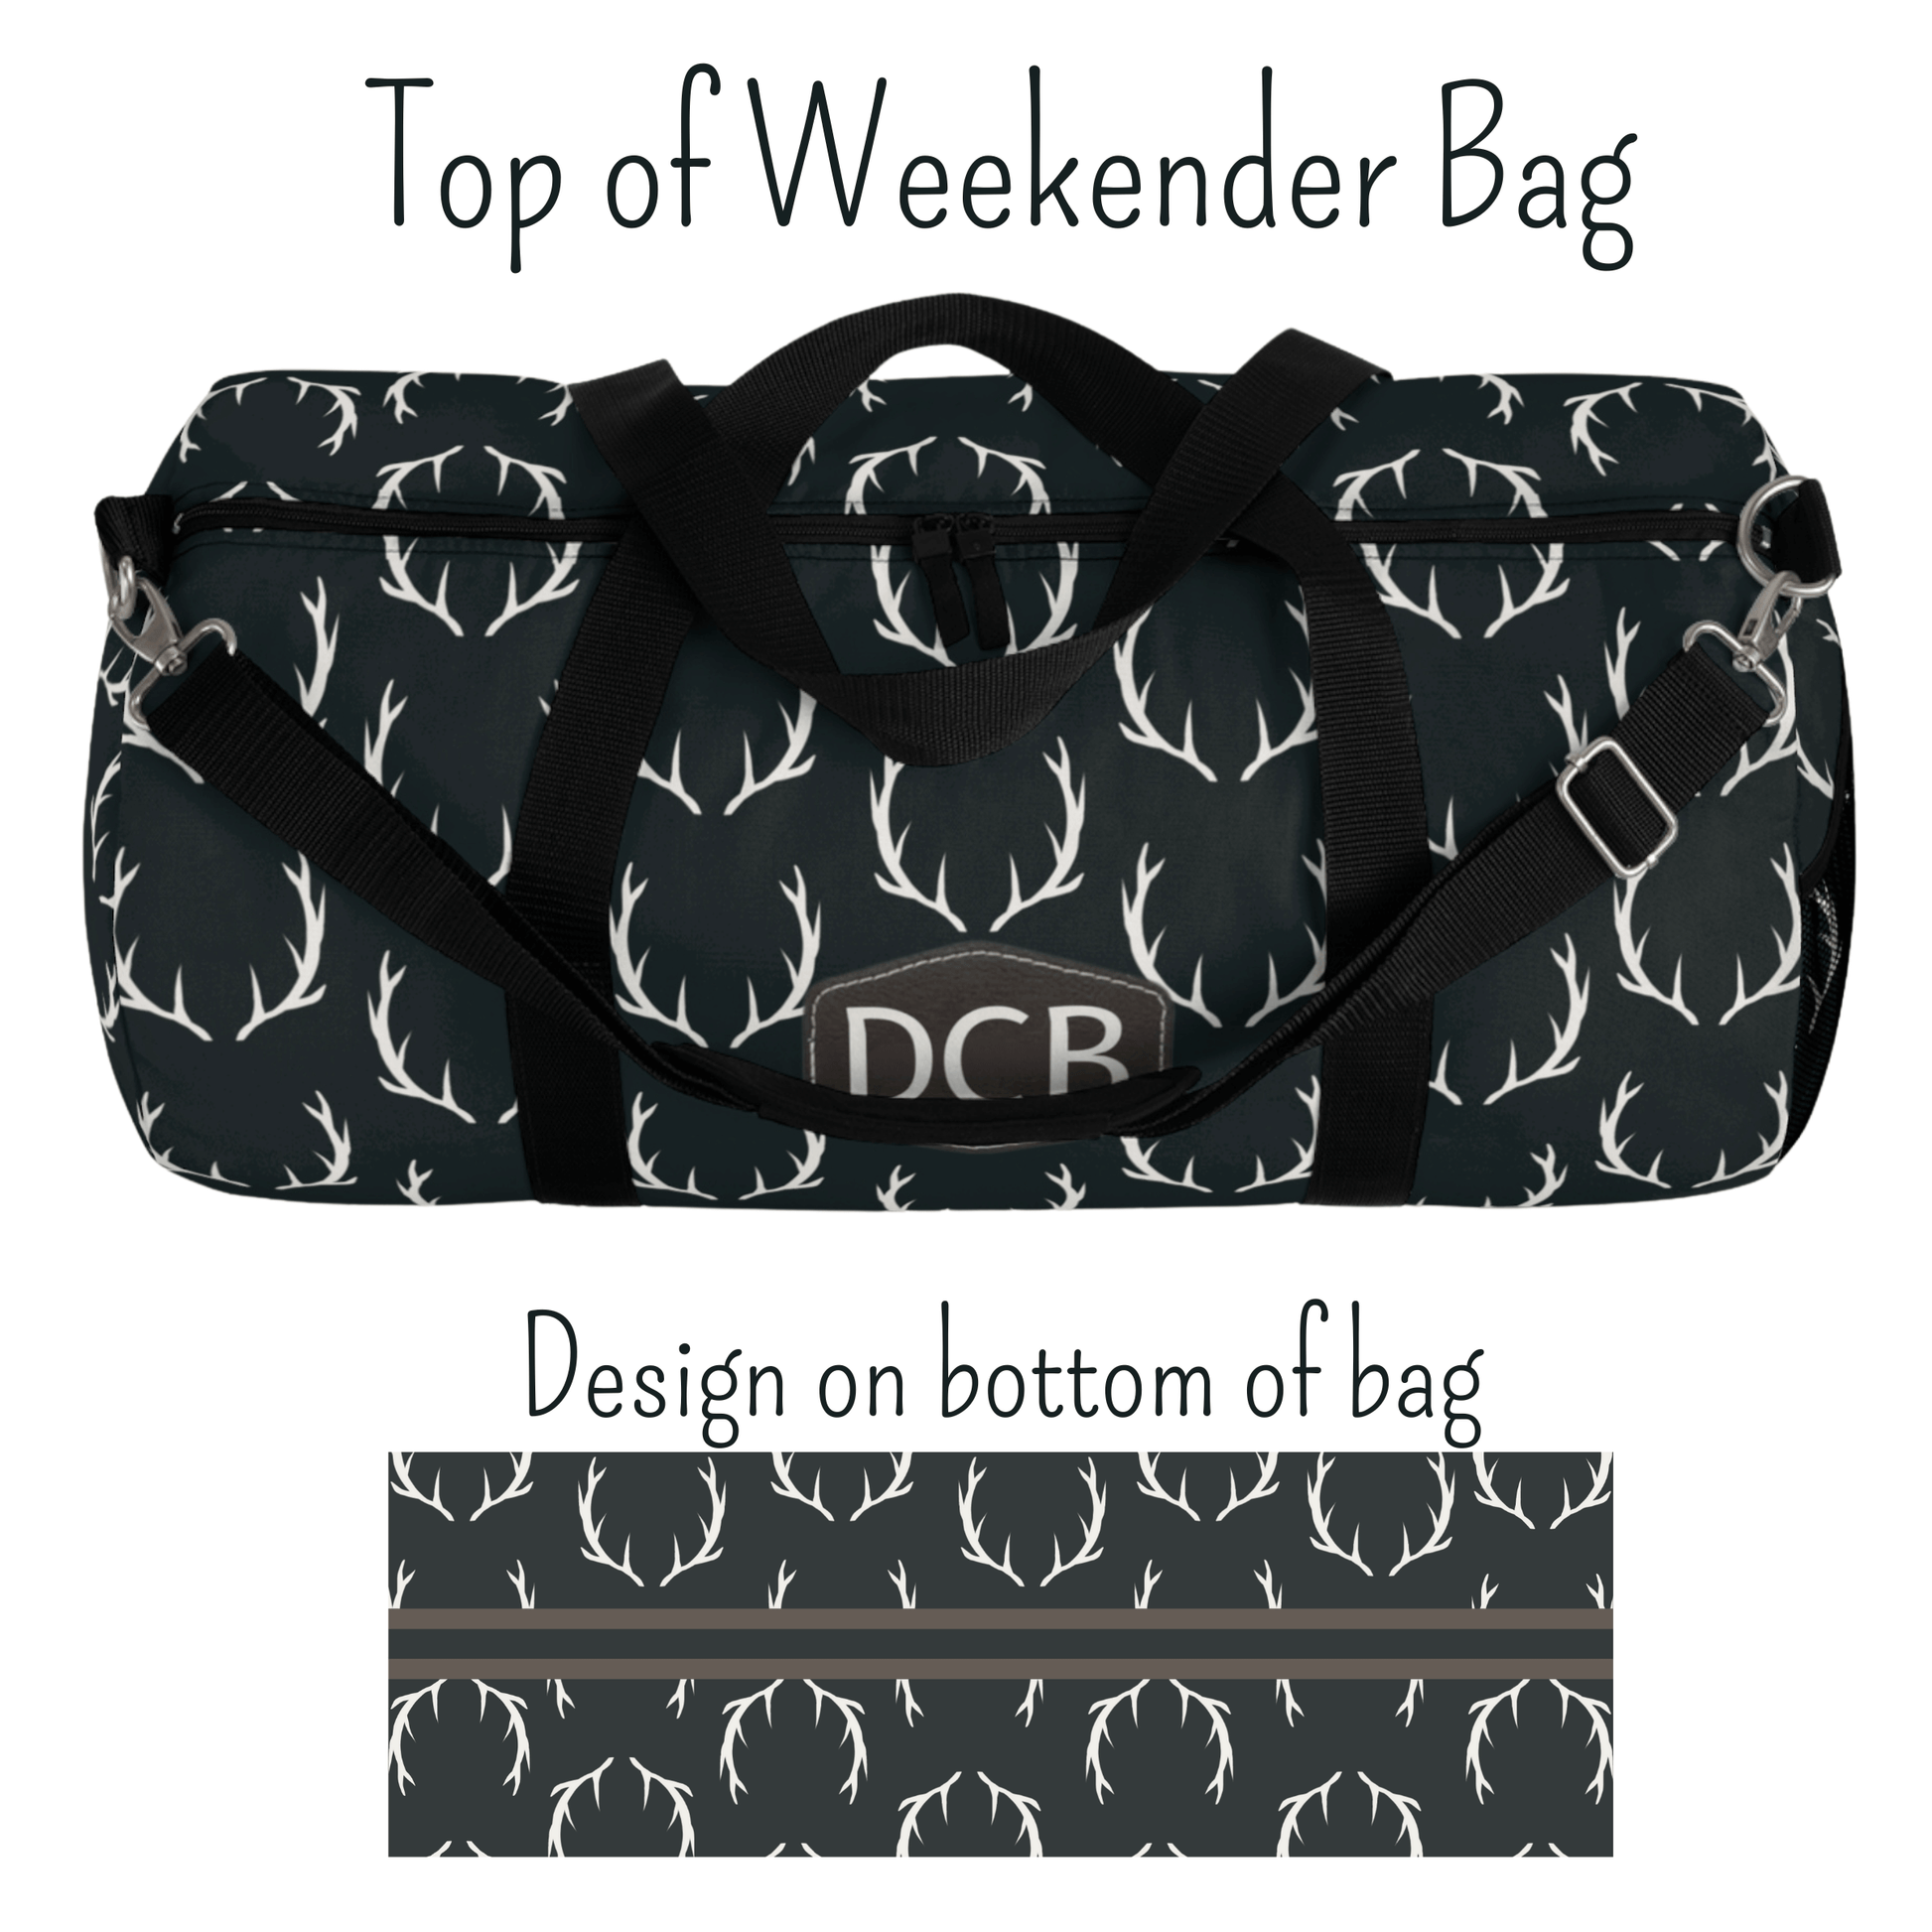 The top of our weekend bag for men shows the black quality zipper with two heads for easy access. The bottom of the bag has a brown and black stripe on the print.